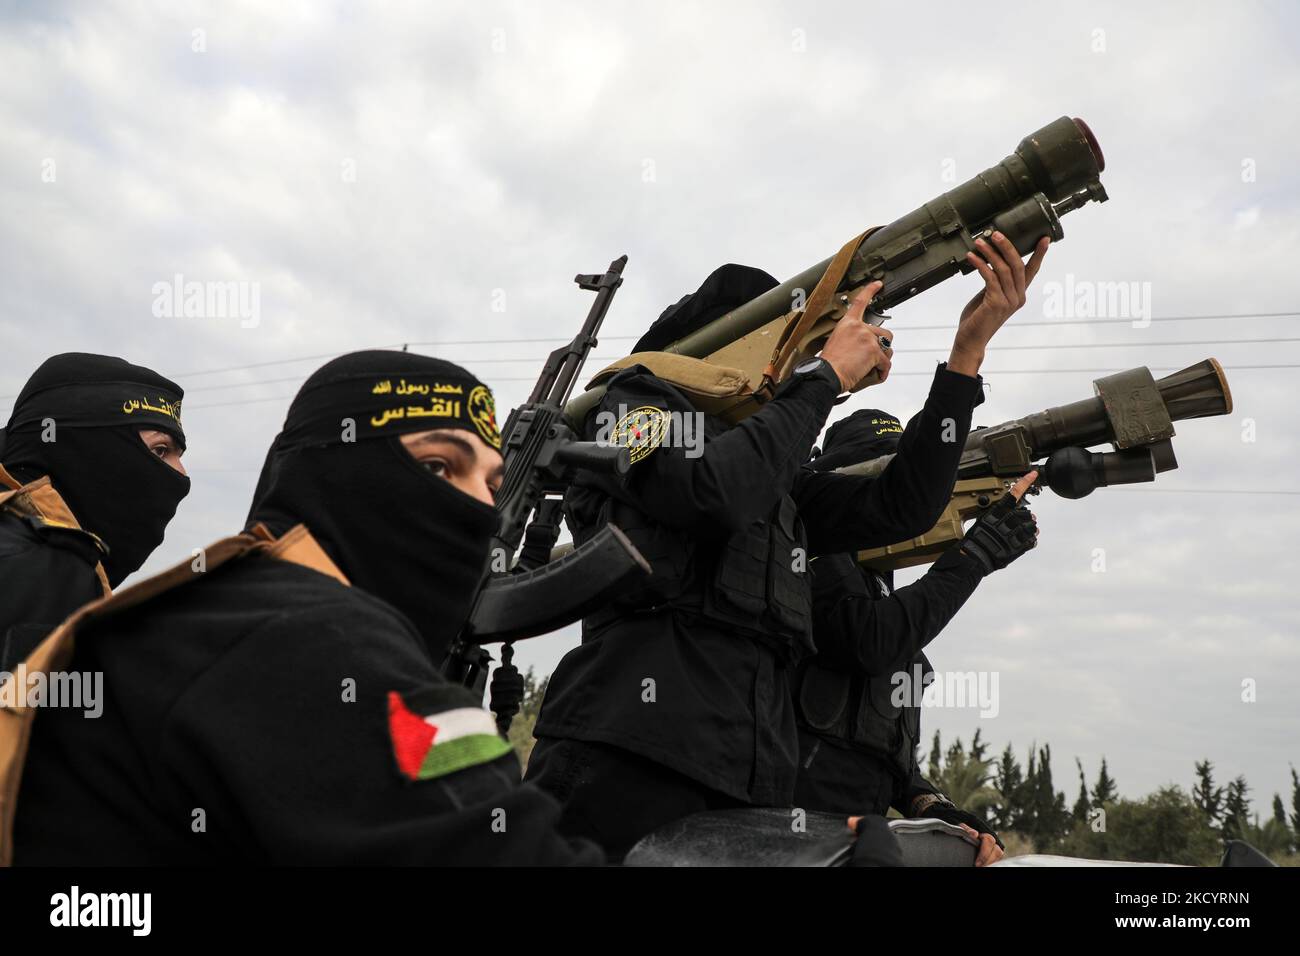 Palestinian members of the Al-Quds Brigades, the military wing of the Islamic Jihad group, march with their rifles along the main road of Gaza Strip, take part in a military parade to celebrate after ?a Palestinian prisoner Hisham Abu Hawash who ended his hunger strike after Israel committed to his eventual release, on January 5, 2022. (Photo by Majdi Fathi/NurPhoto) Stock Photo